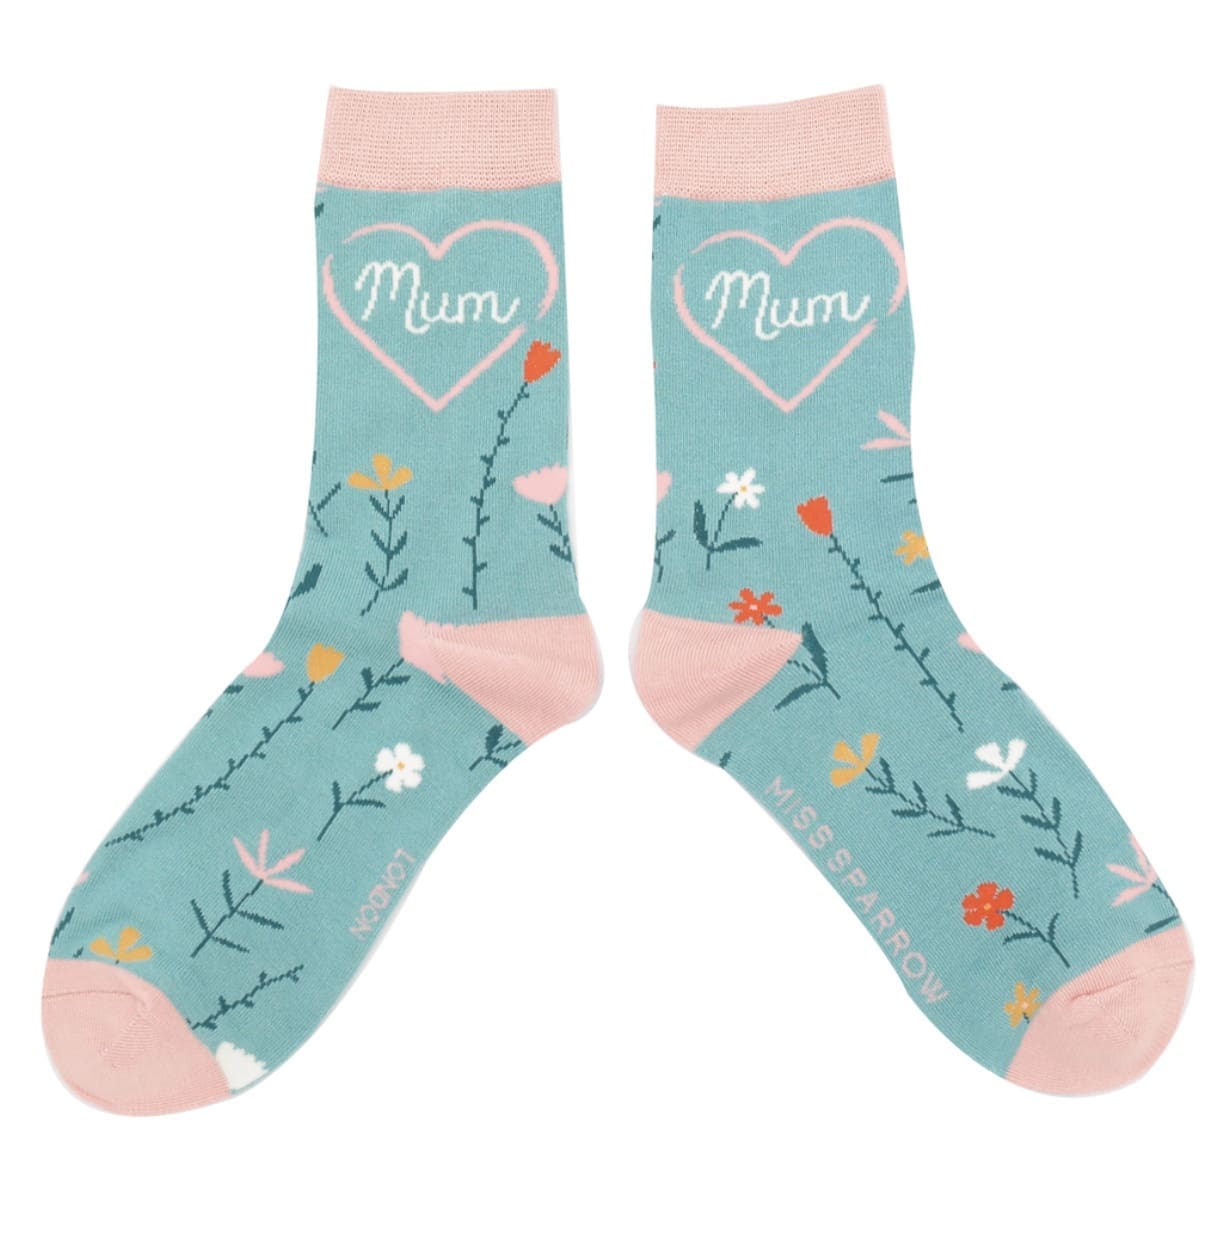 A pair of blue and pink socks with the word mom on them.